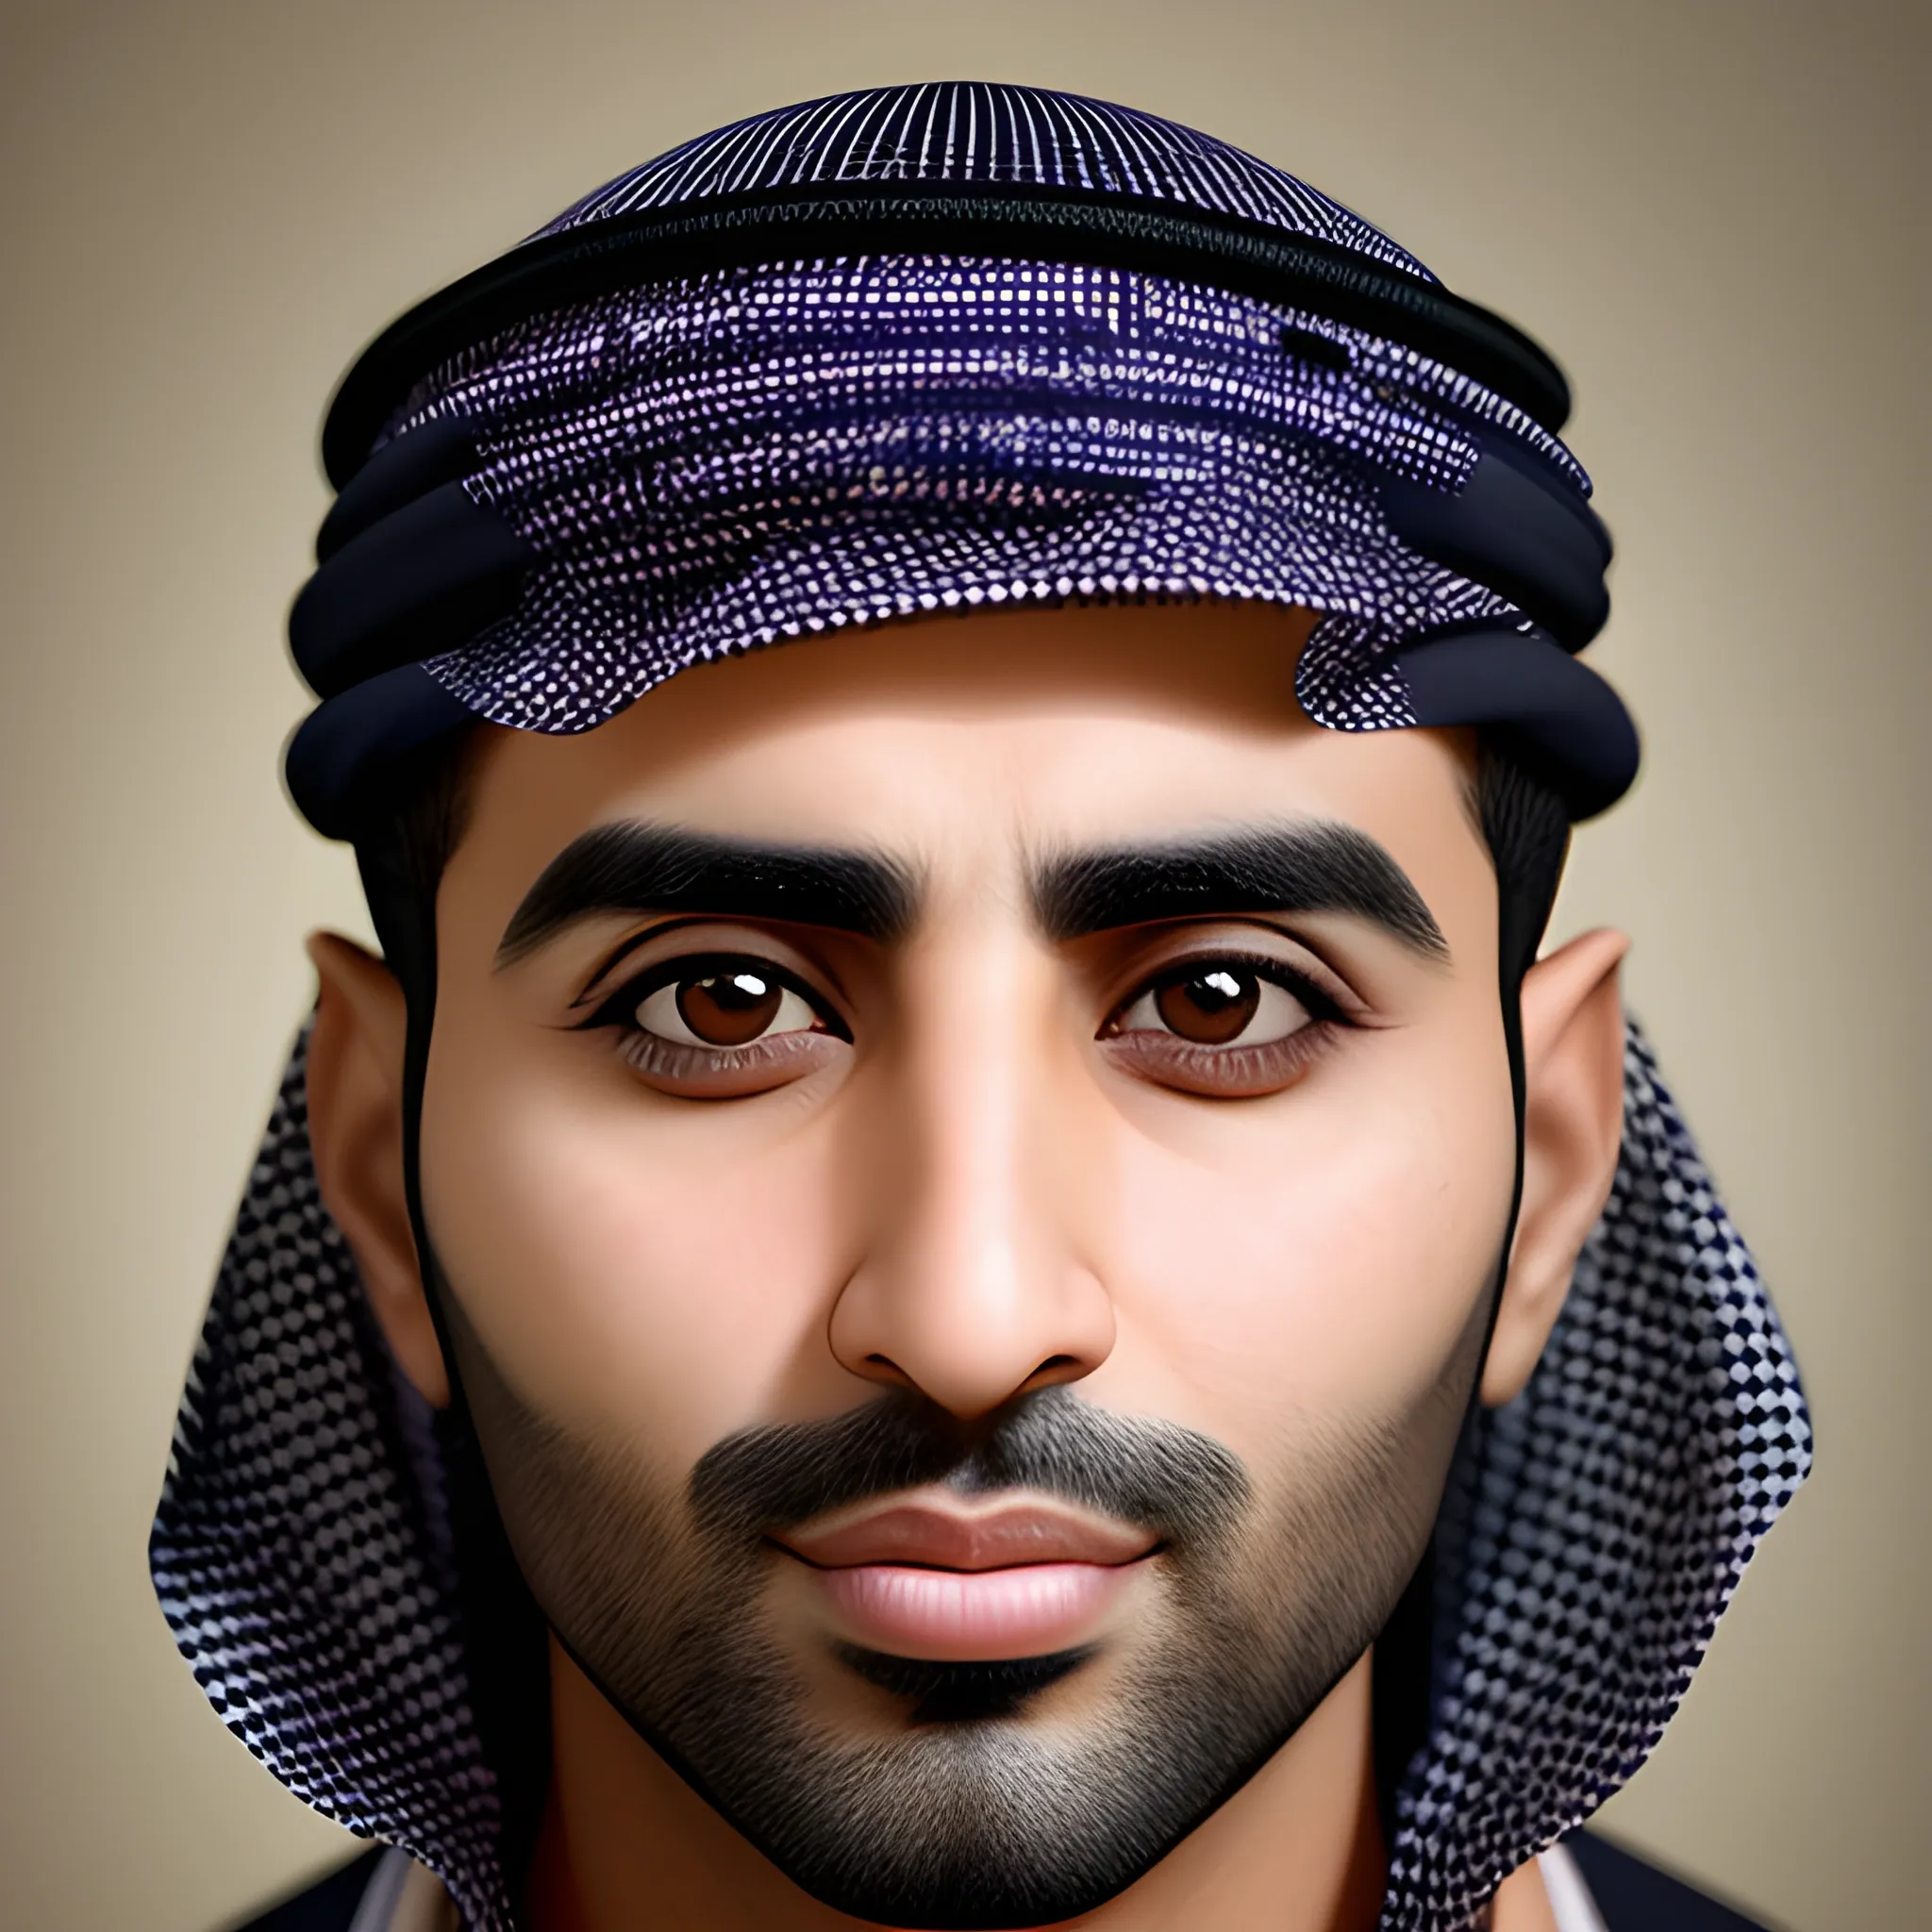 handsome arabic 30 years old man, big eyes, short hair, extreme picture quality, ambient light, exquisite facial features, 3D